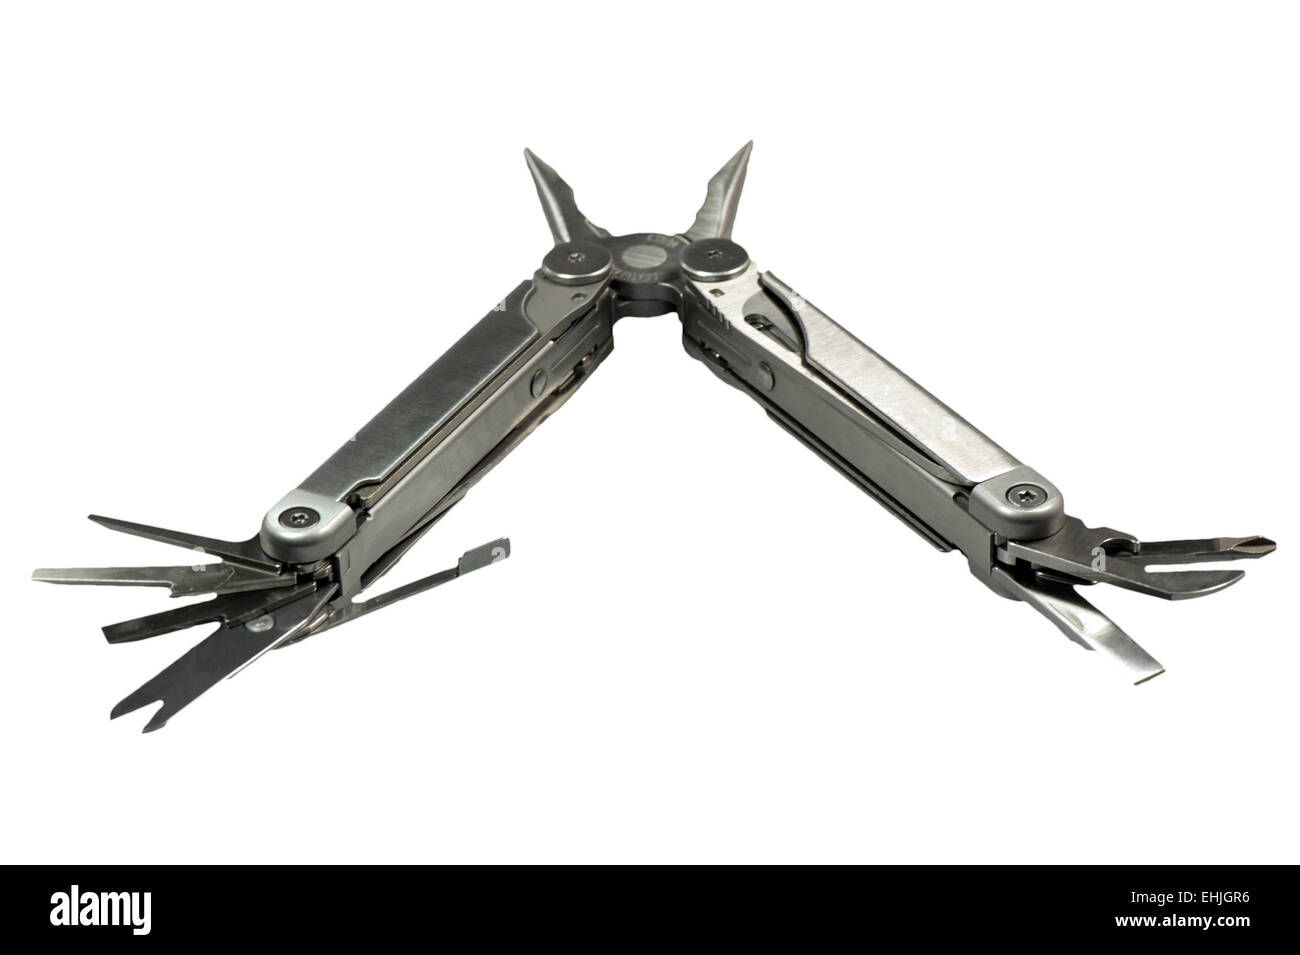 Pliers and the Leatherman Stock Photo